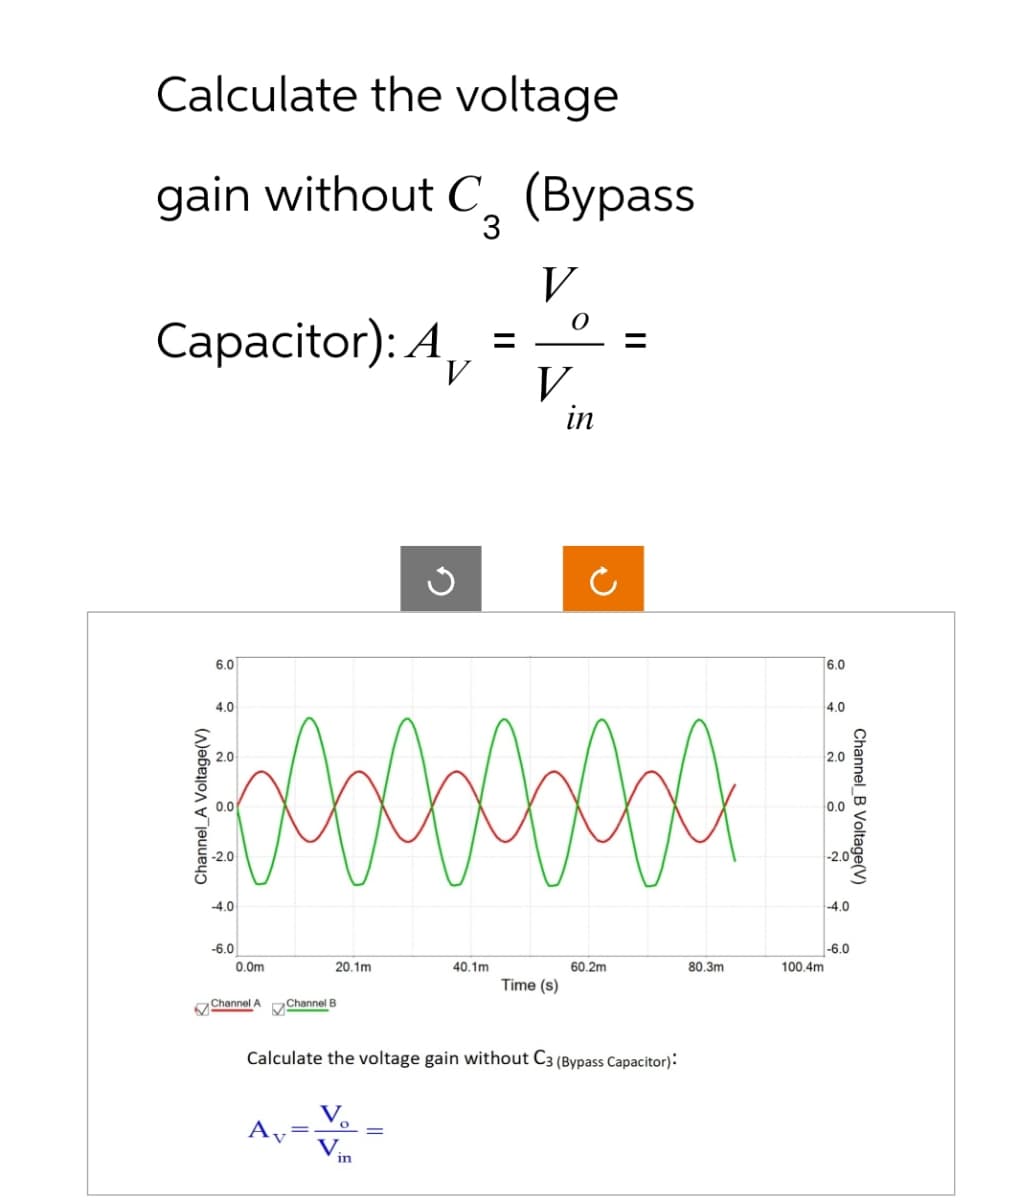 Calculate the voltage
gain without C (Bypass
3
Capacitor): A
Channel A Voltage(V)
6.0
4.0
2.0
0.0
-2.0
-4.0
-6.0
0.0m
Channel A
bebebebeba
20.1m
A
Channel B
V
G
in
=
40.1m
V
O
V
Time (s)
in
Ċ
Calculate the voltage gain without C3 (Bypass Capacitor):
60.2m
80.3m
100.4m
6.0
4.0
2.0
0.0
-2.0
-4.0
Channel B Voltage(V)
-6.0